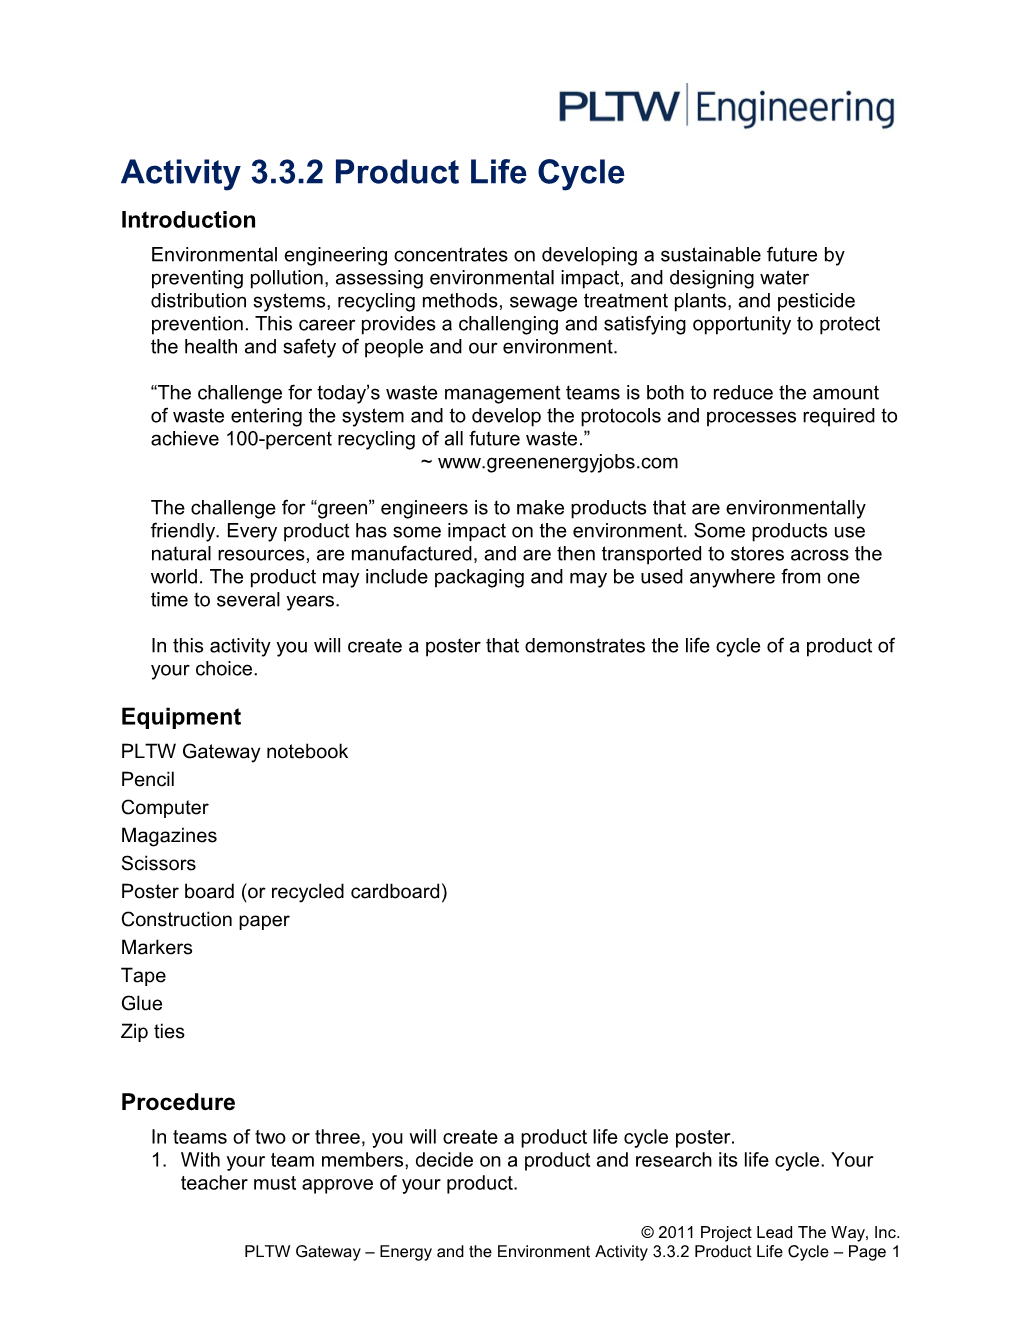 Activity 3.3.2 Product Life Cycle